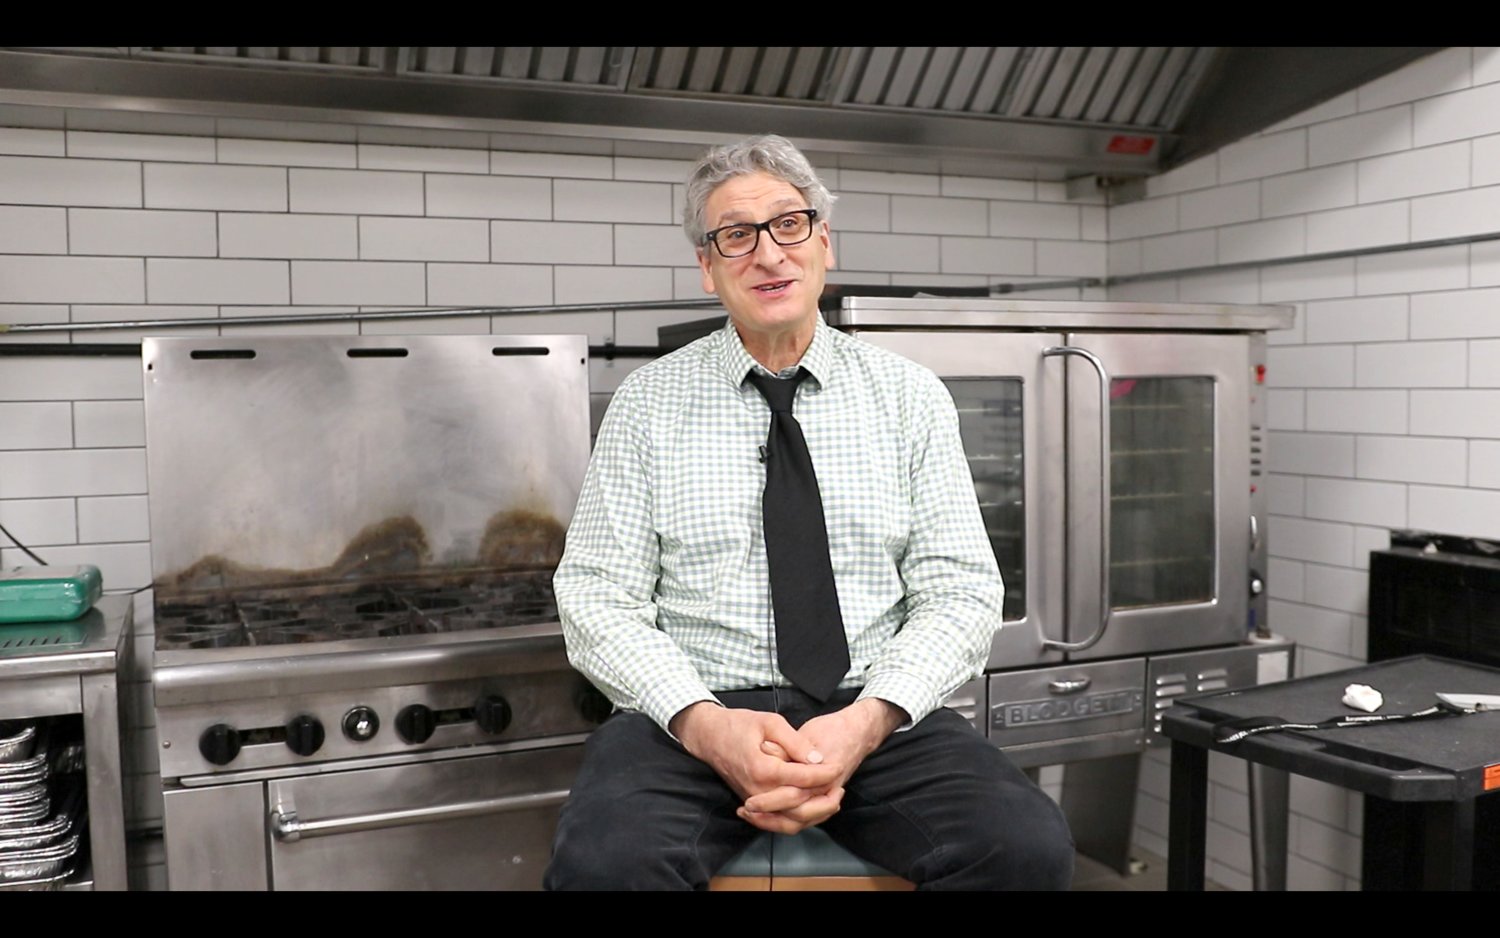 Neal Drobnis in the kitchen at the Dwares Jewish Community Center